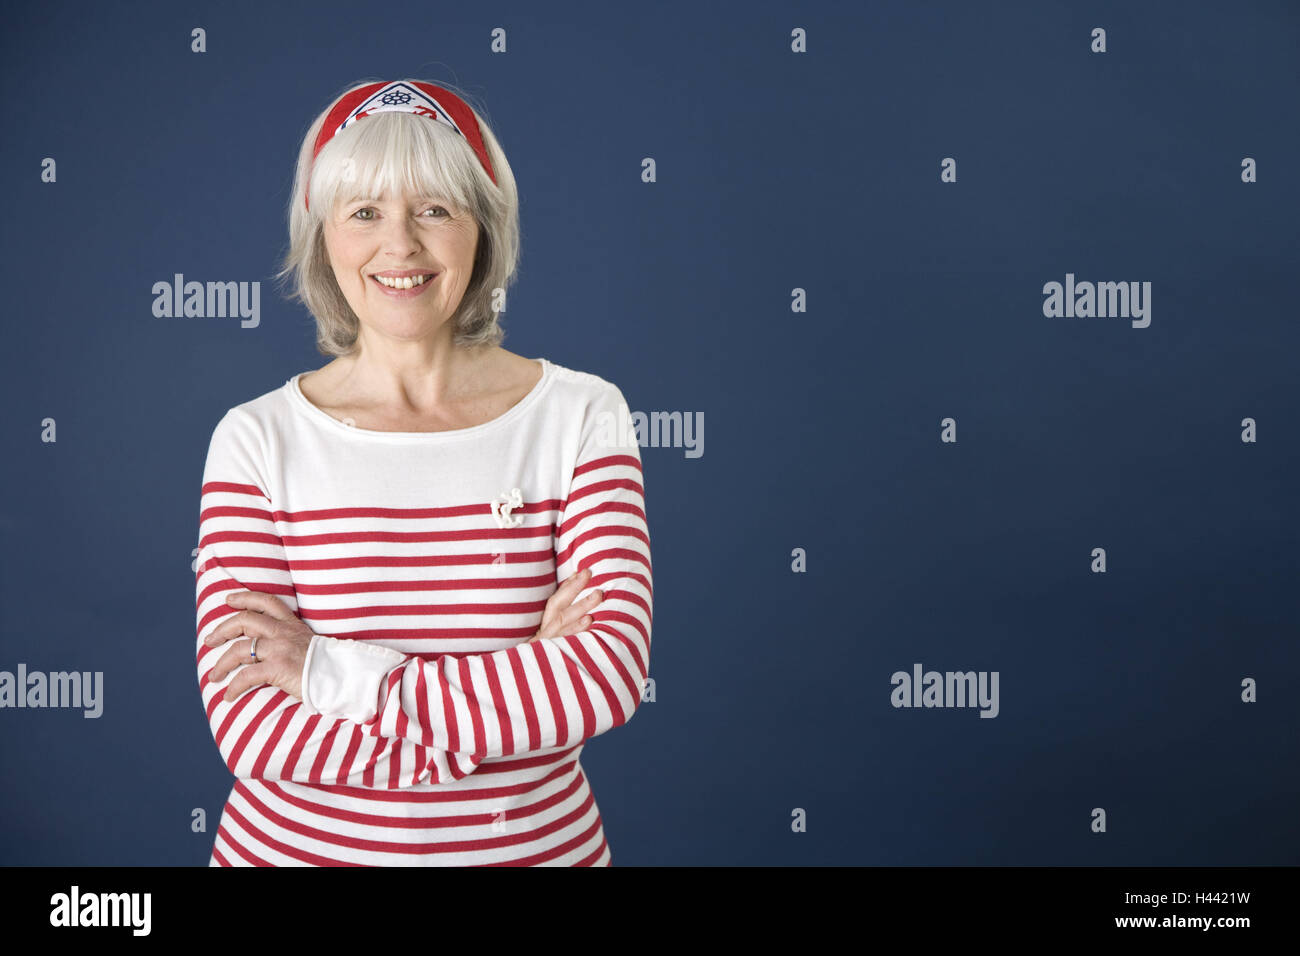 Senior, course, youthfully, hair-band, pullovers, red-white, smile, half portrait, Best-Age, woman, senior citizens, 60 +, grey-haired, T-shirt, touched, folds, happy, openly, transmission, naturalness, studio, Stock Photo